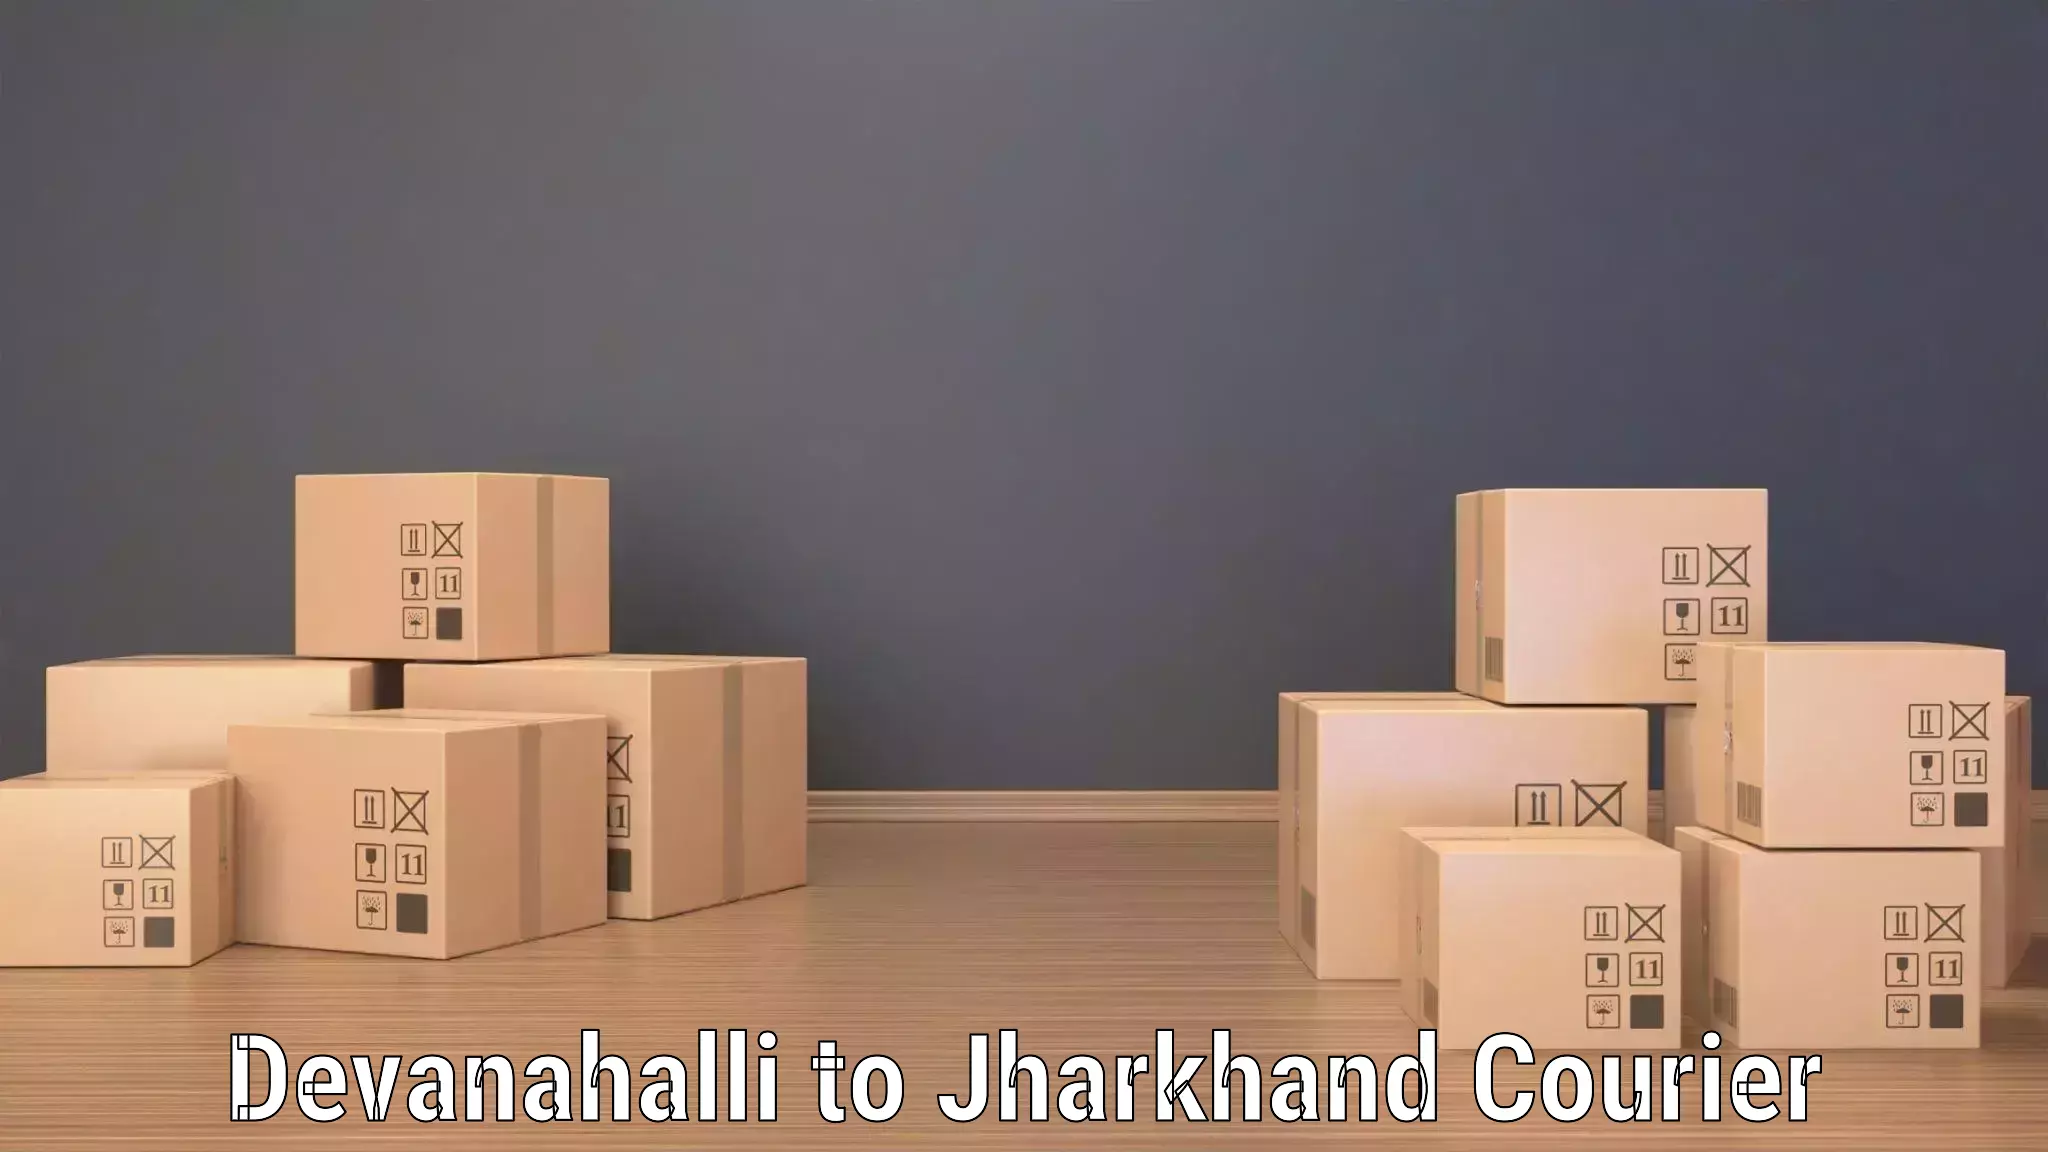 Flexible delivery schedules Devanahalli to Chandil